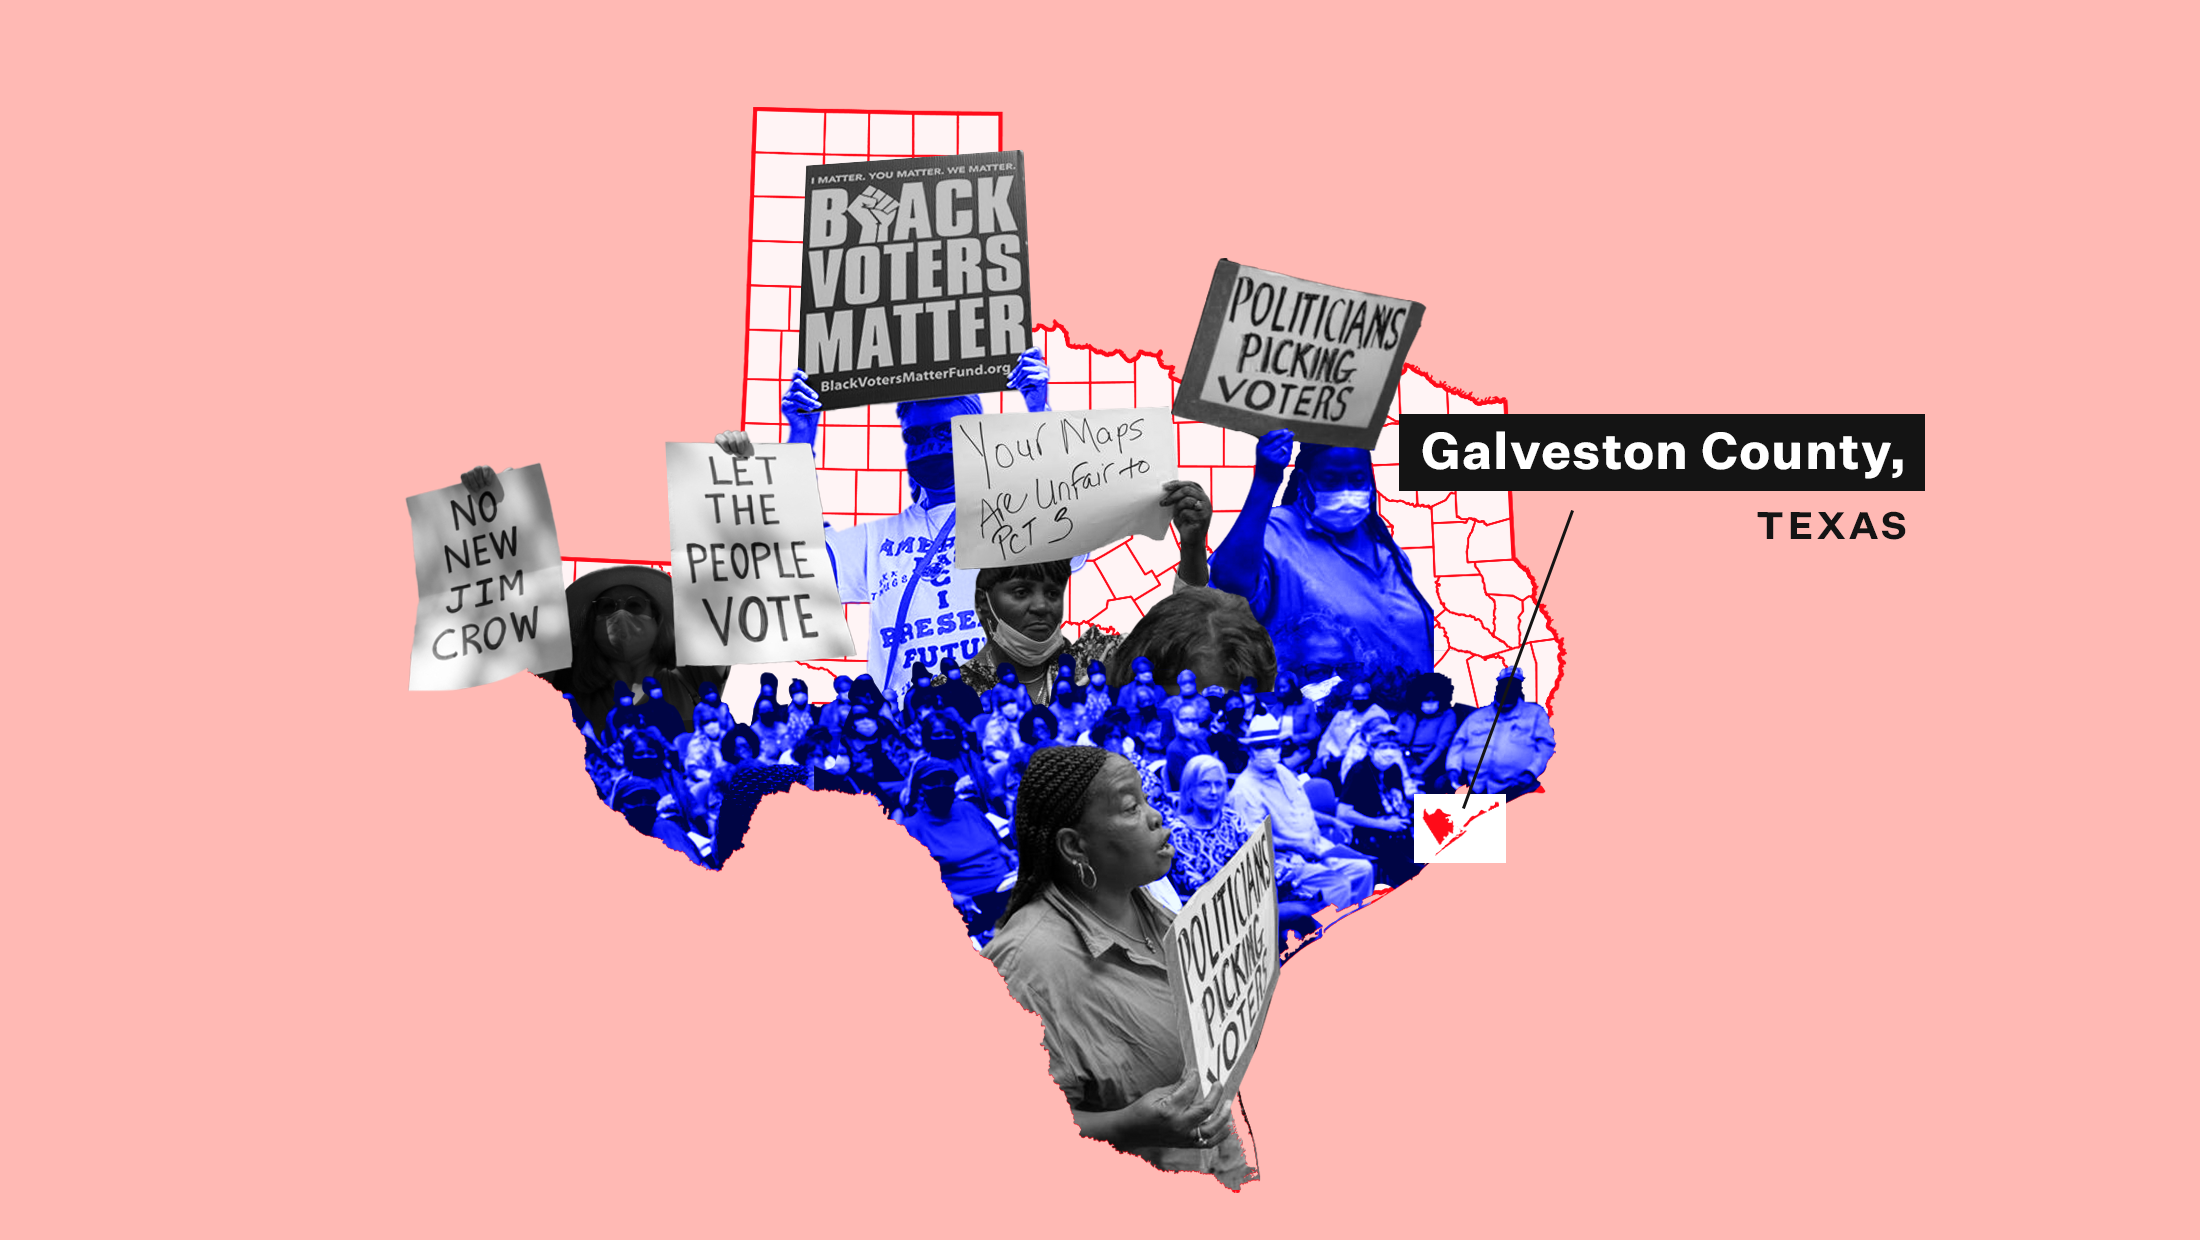 Pink background with map of Texas and blue toned images of people protesting with Black Lives Matter signs and others that read "let the people vote", "no new jim crow", "politicians picking voters" and a call out box that reads "Galveston County, Texas."